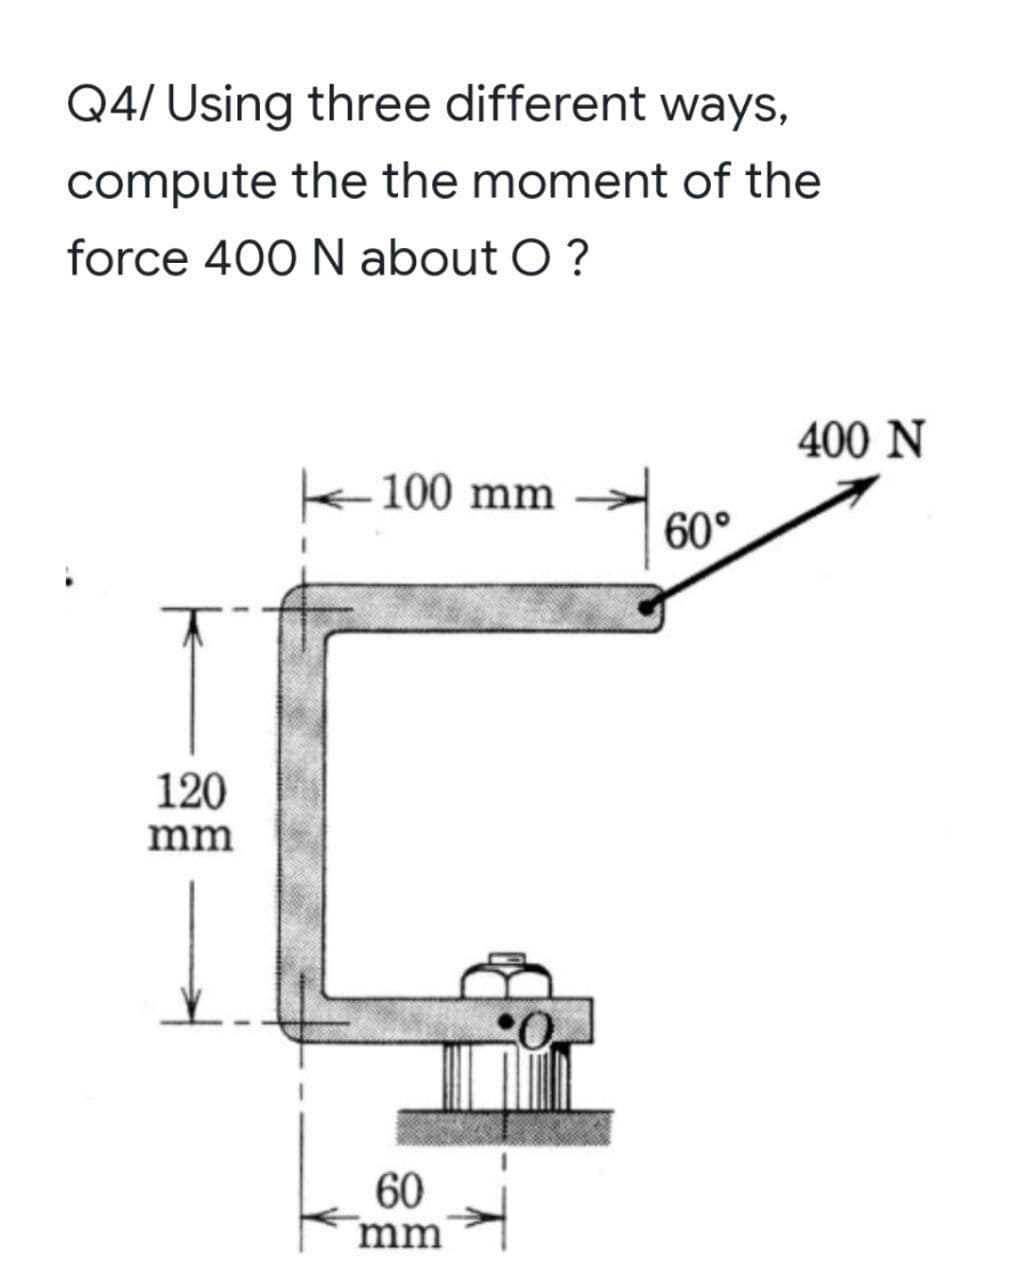 Q4/ Using three different ways,
compute the the moment of the
force 400 N about O?
400 N
k100 mm
60°
120
mm
60
mm
